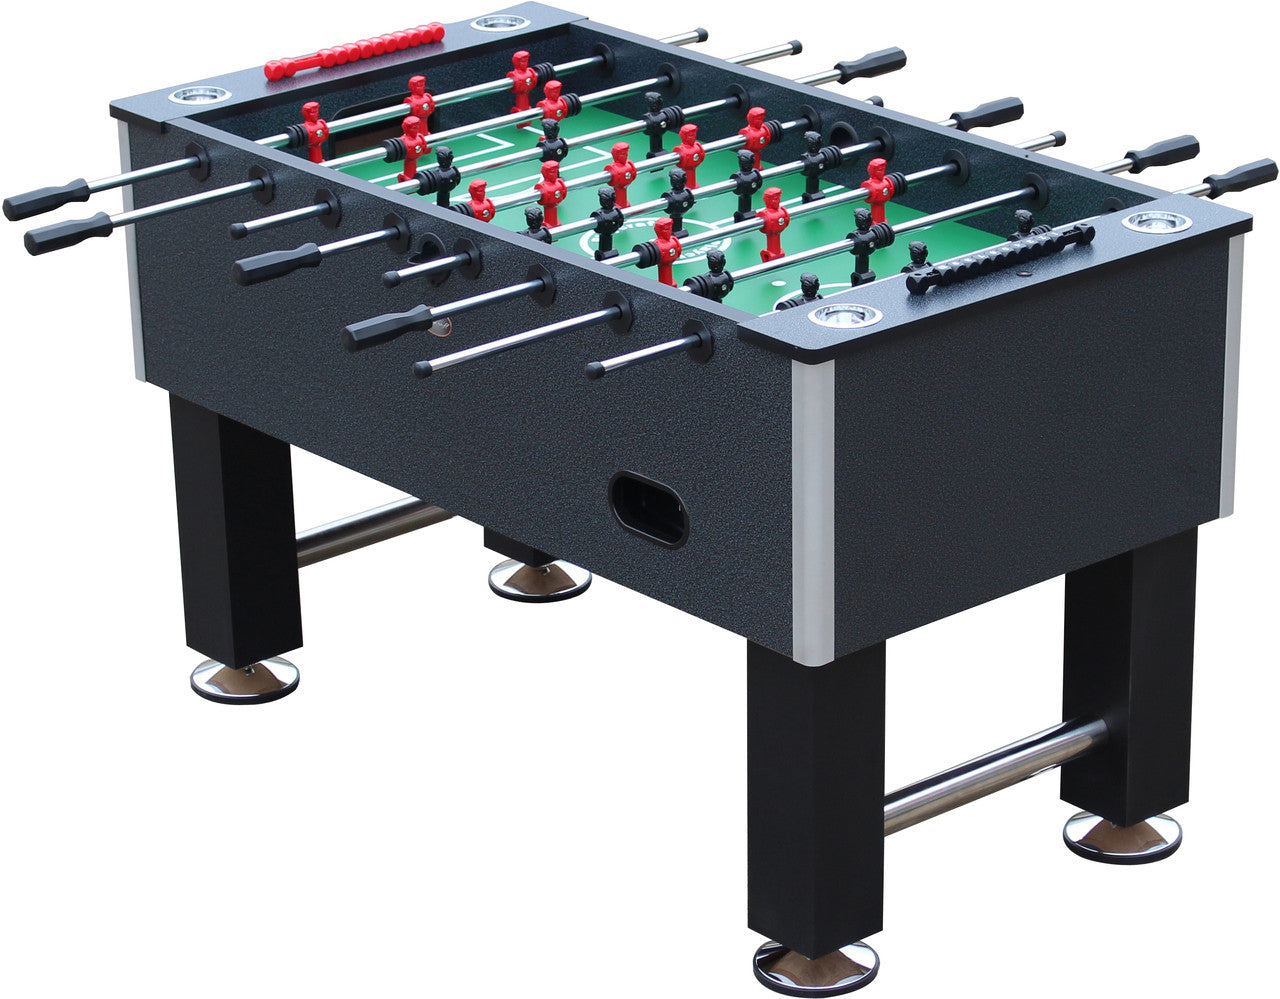  Picture of Playcraft Pitch Foosball Table in Charcoal